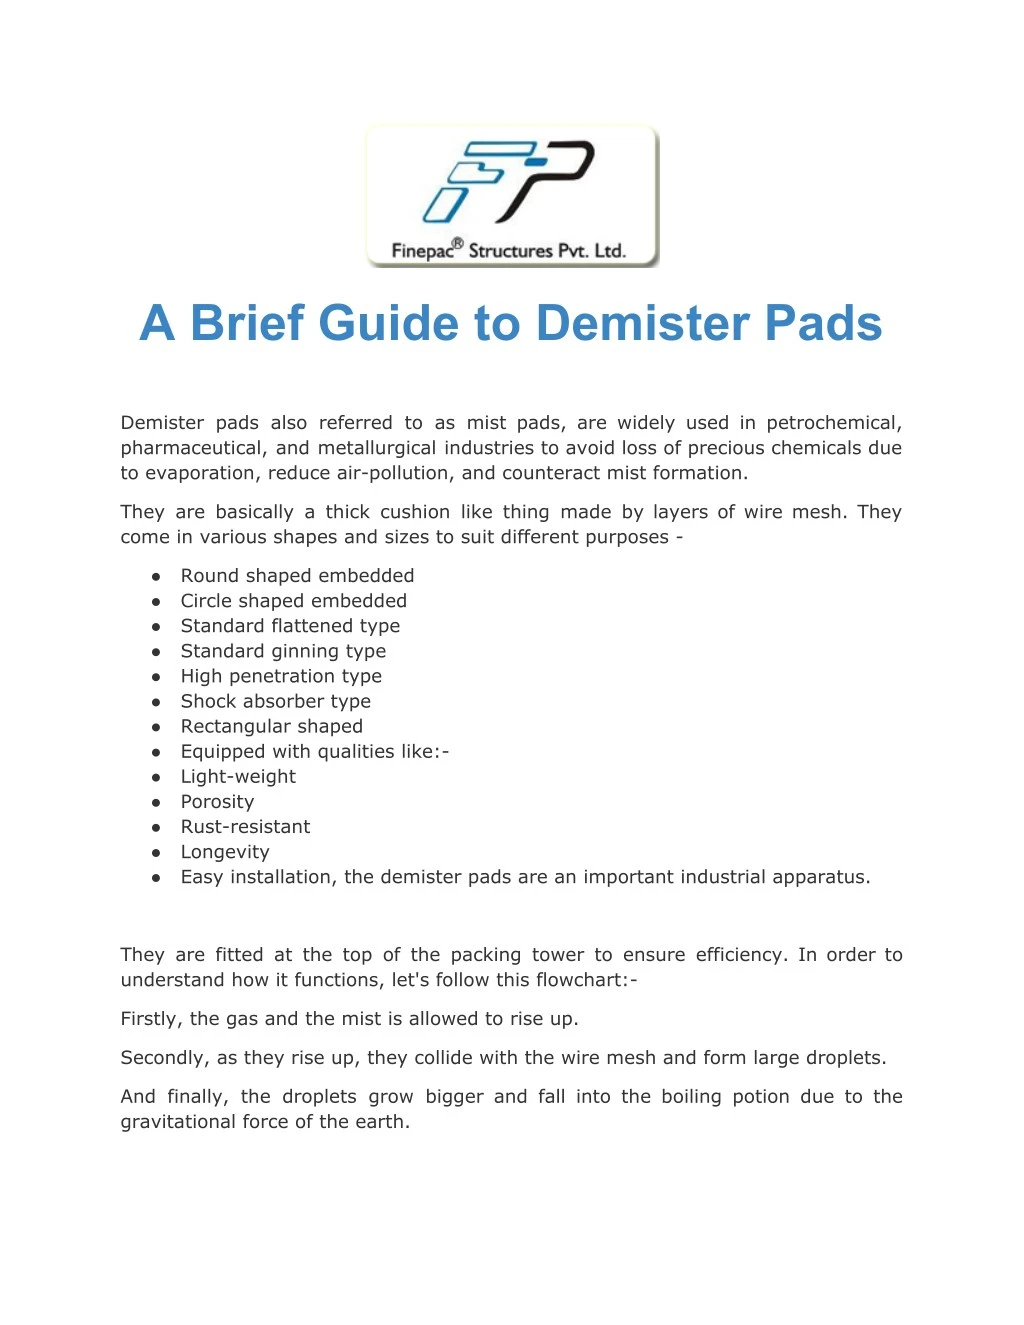 a brief guide to demister pads